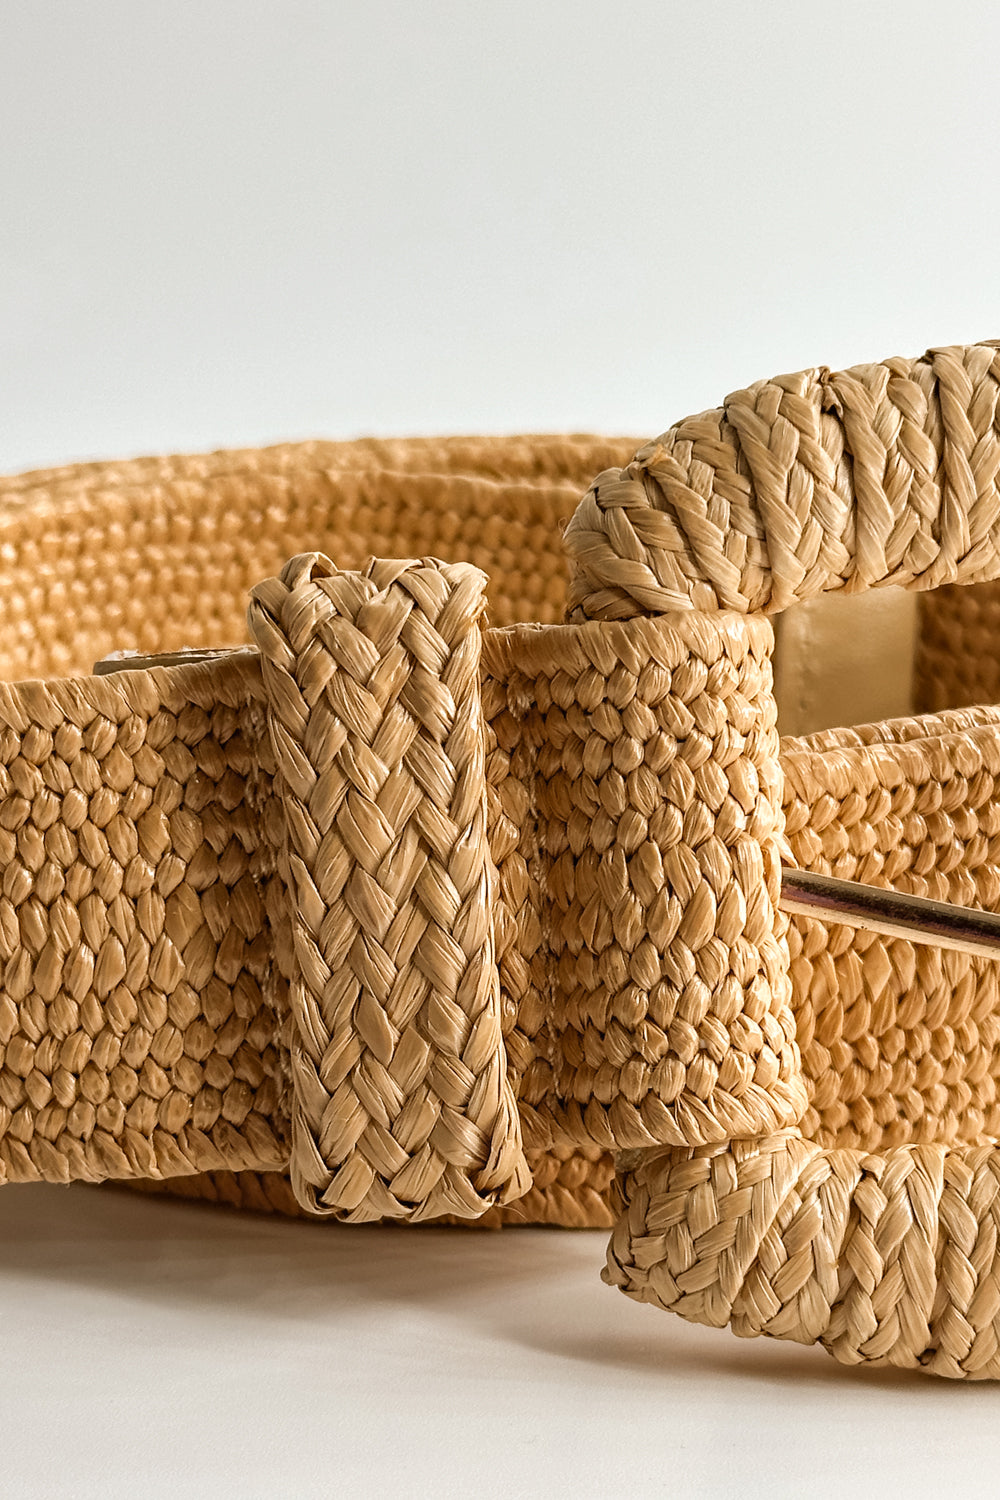 Close up view of the Nova Light Tan Rattan Belt which features khaki rattan fabric, monochrome rattan covered adjustable buckle